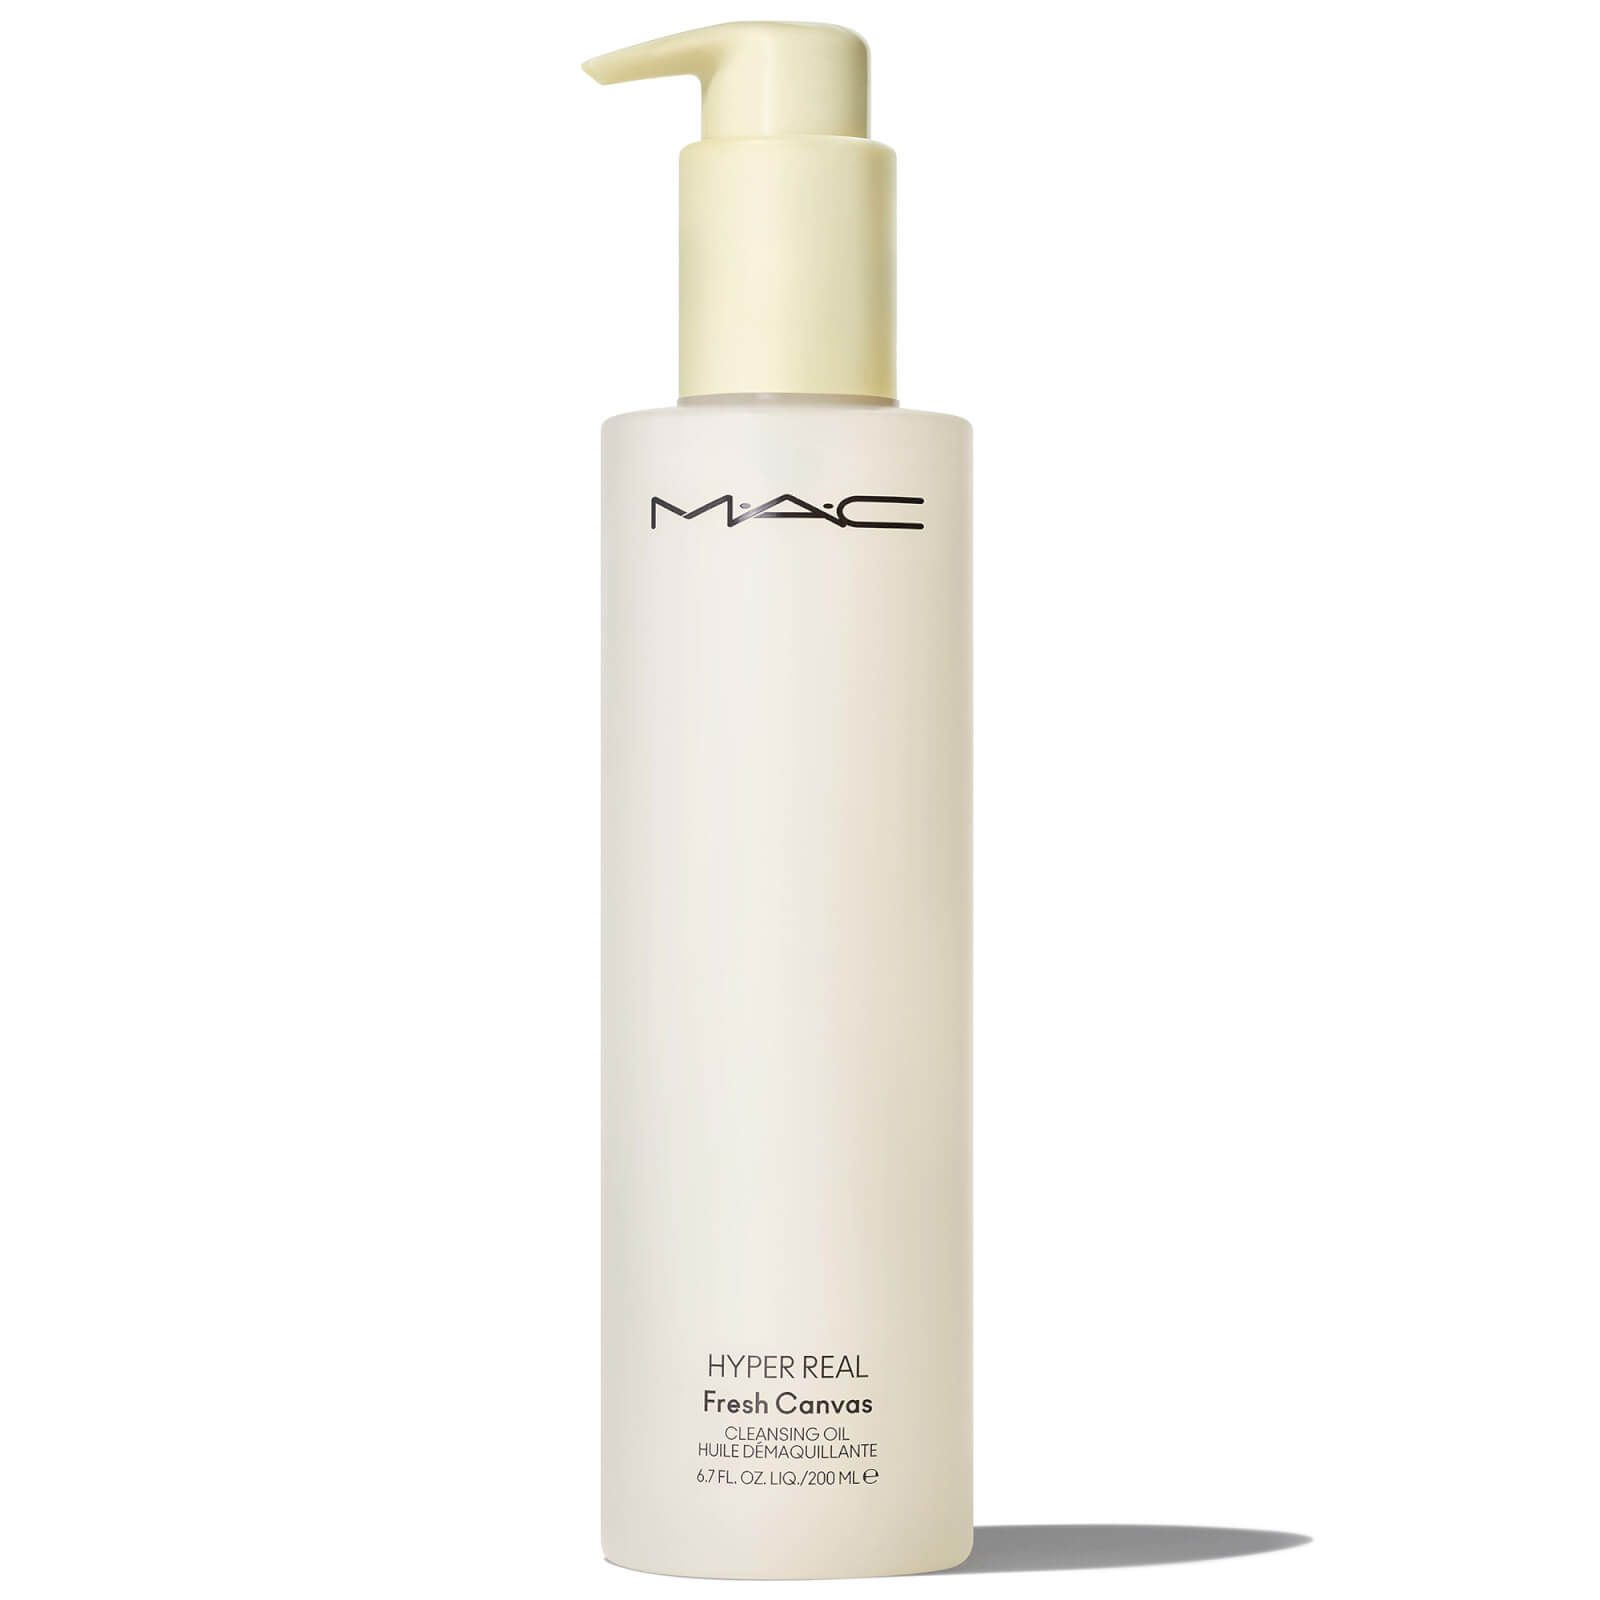 Photos - Facial / Body Cleansing Product MAC Hyper Real Fresh Canvas Cleansing Oil 200ml NY40010000